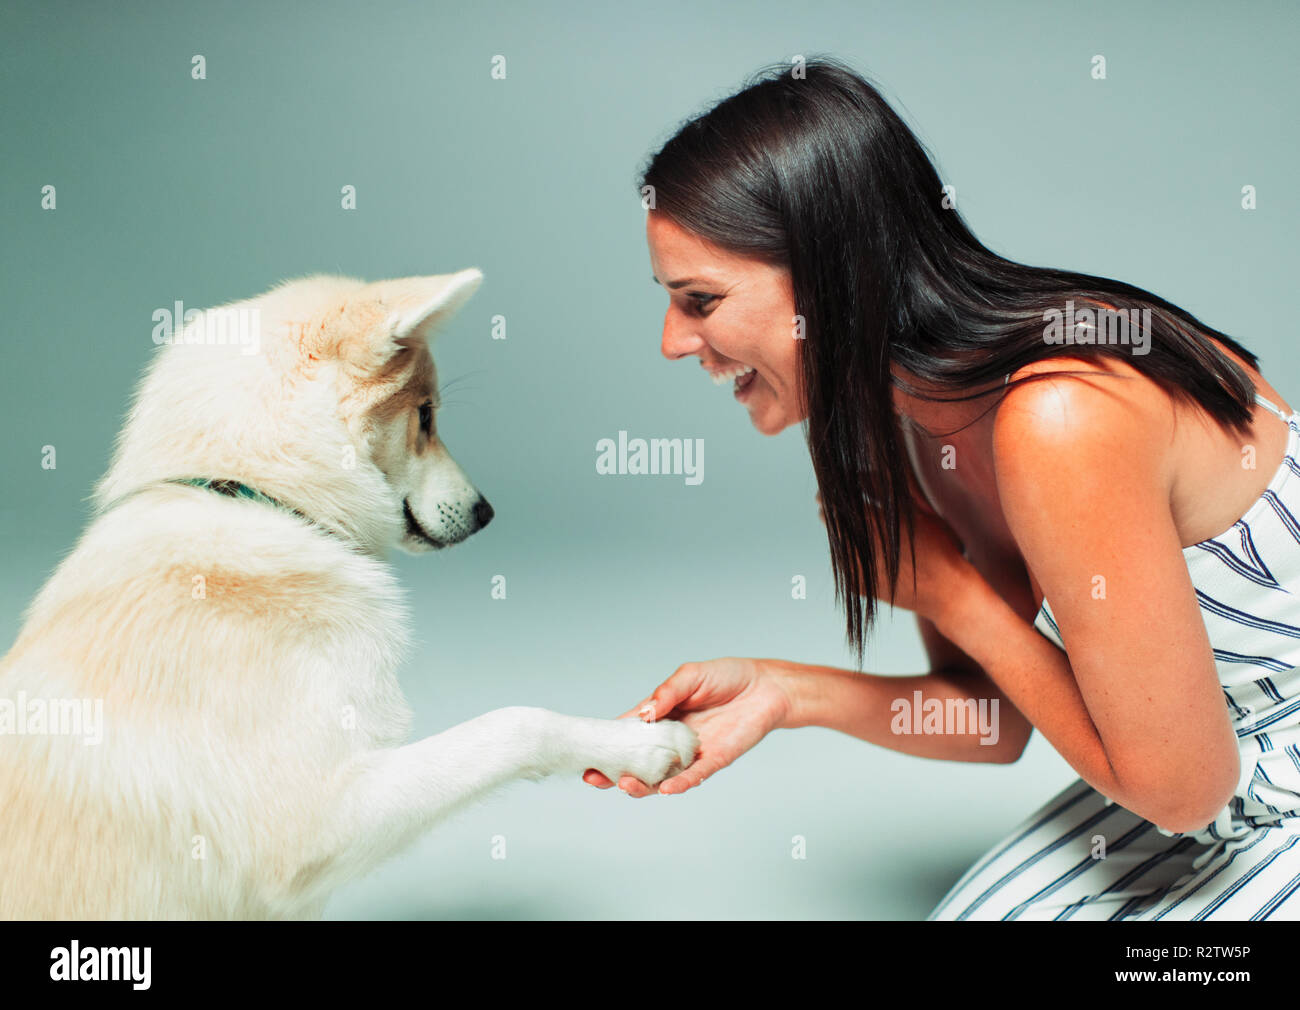 Smiling woman shaking dog paw Banque D'Images